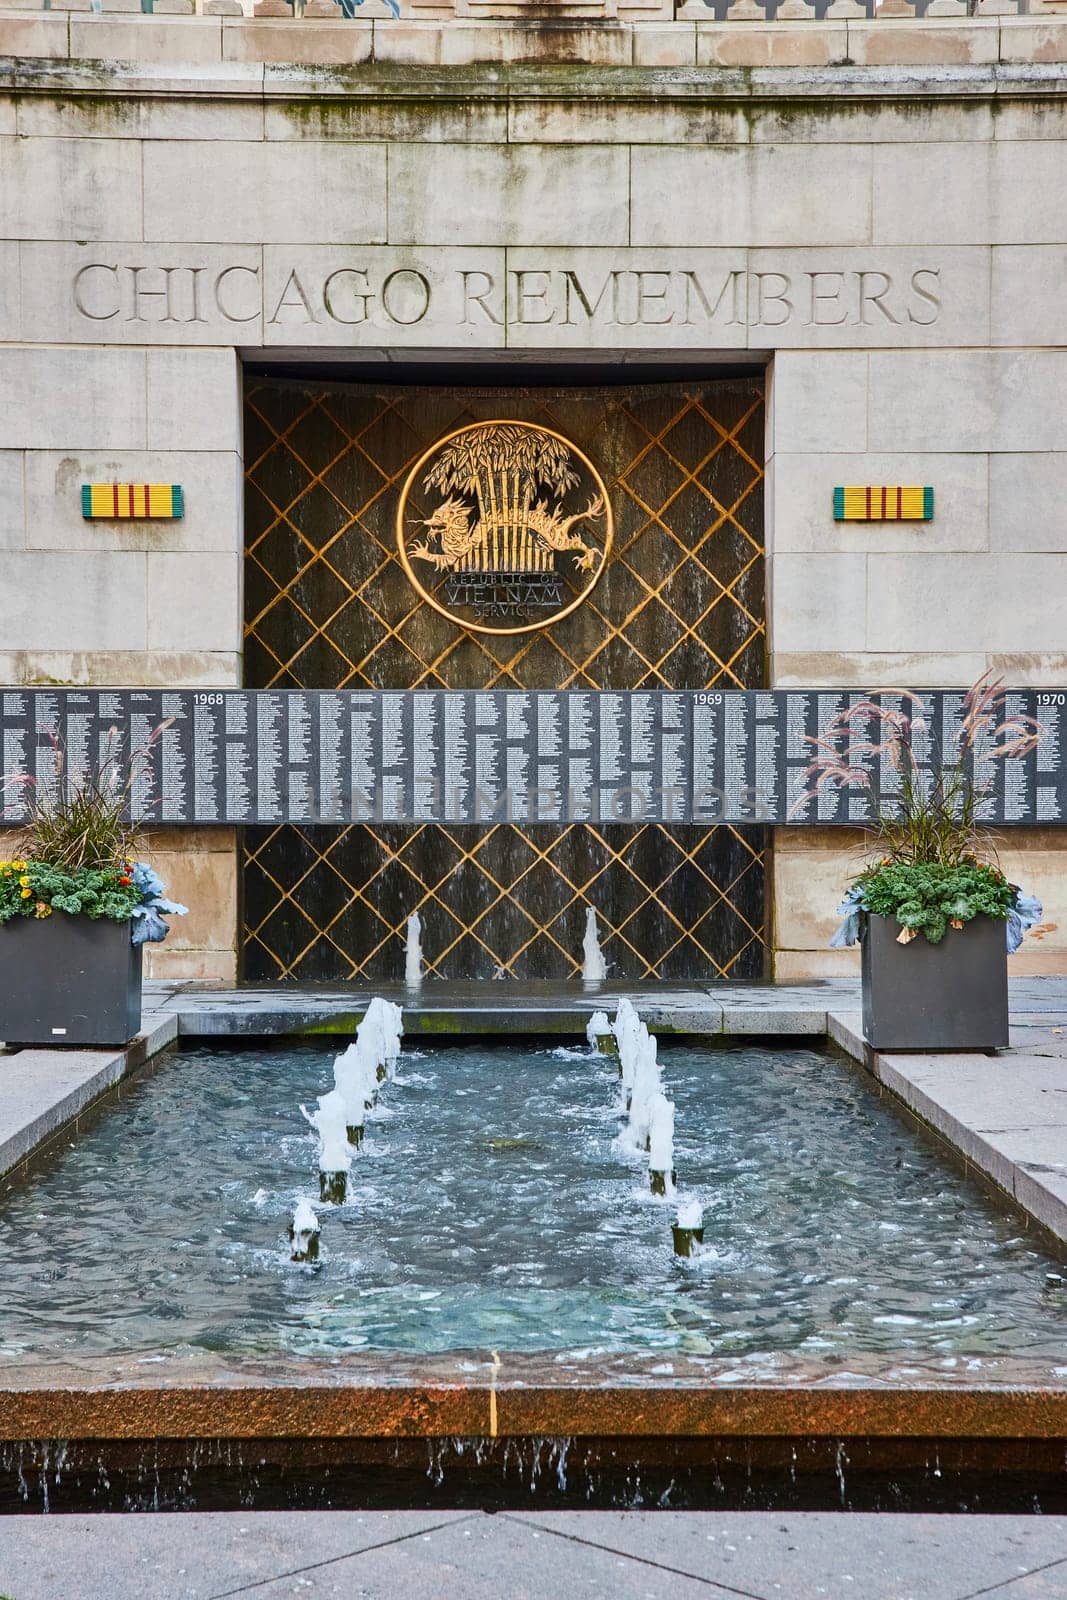 Image of Vietnam Veterans Memorial water fountain for Chicago Remembers on summer day, Illinois, USA